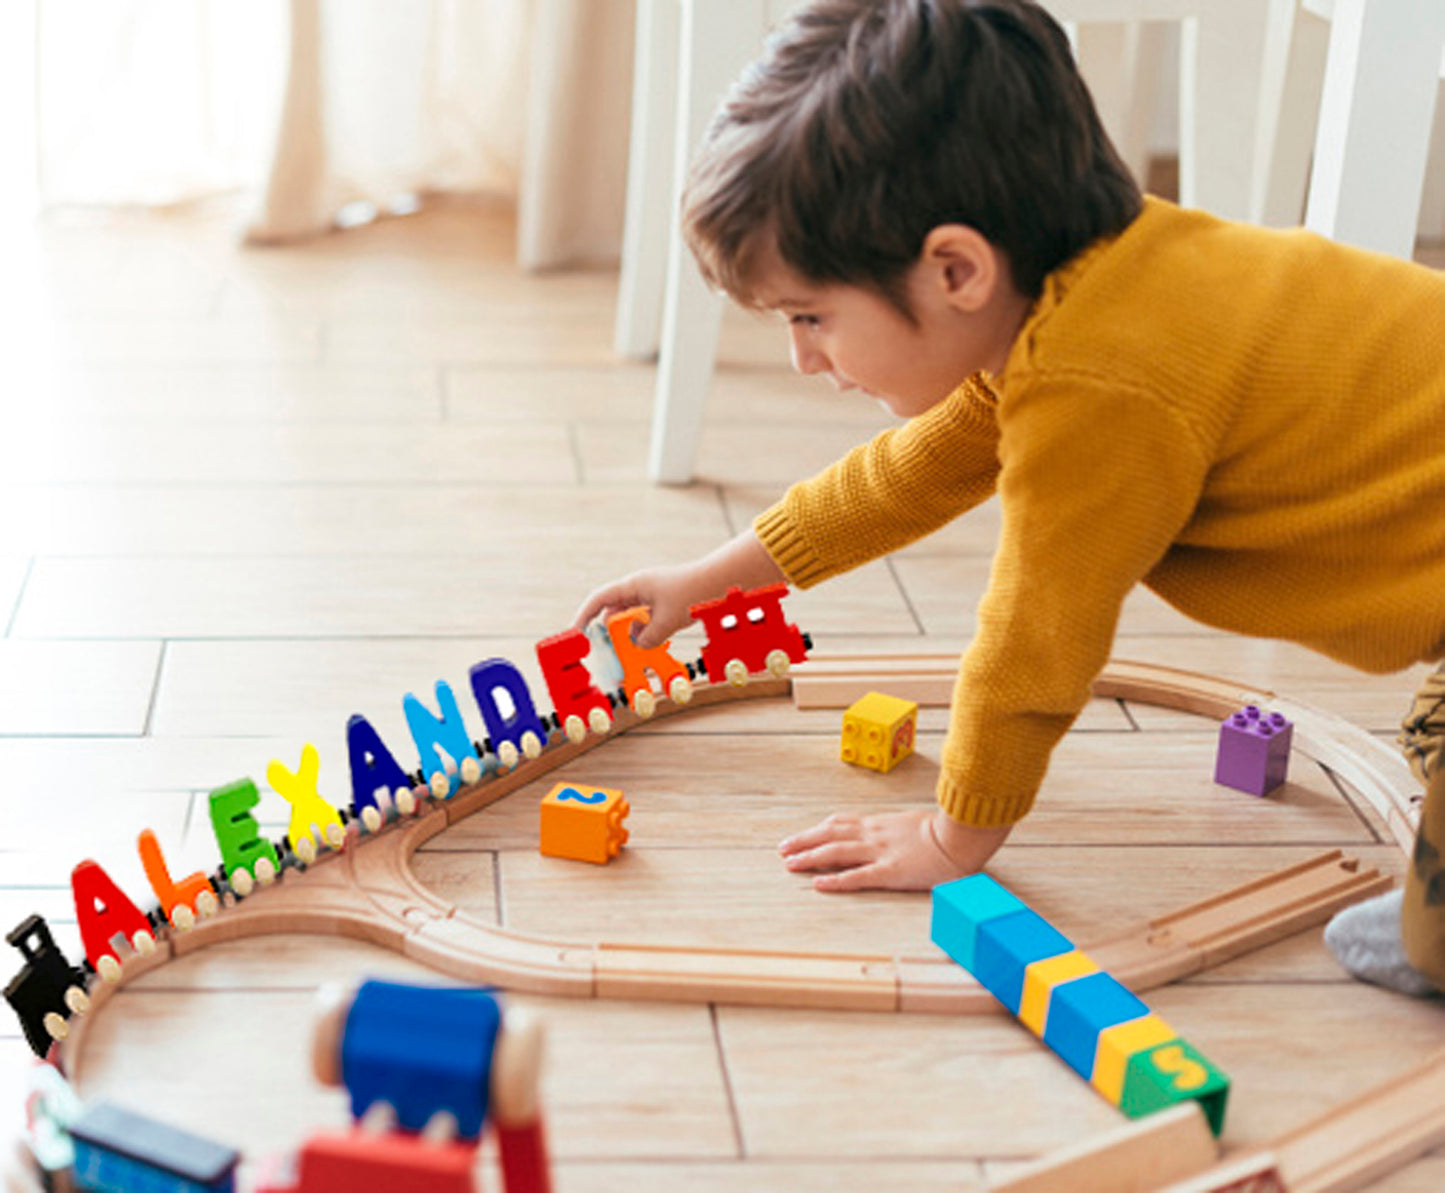 Build Your Name Letter Railroad Puzzle Includes Train & Wagon Free Choose Up To 12 Letters